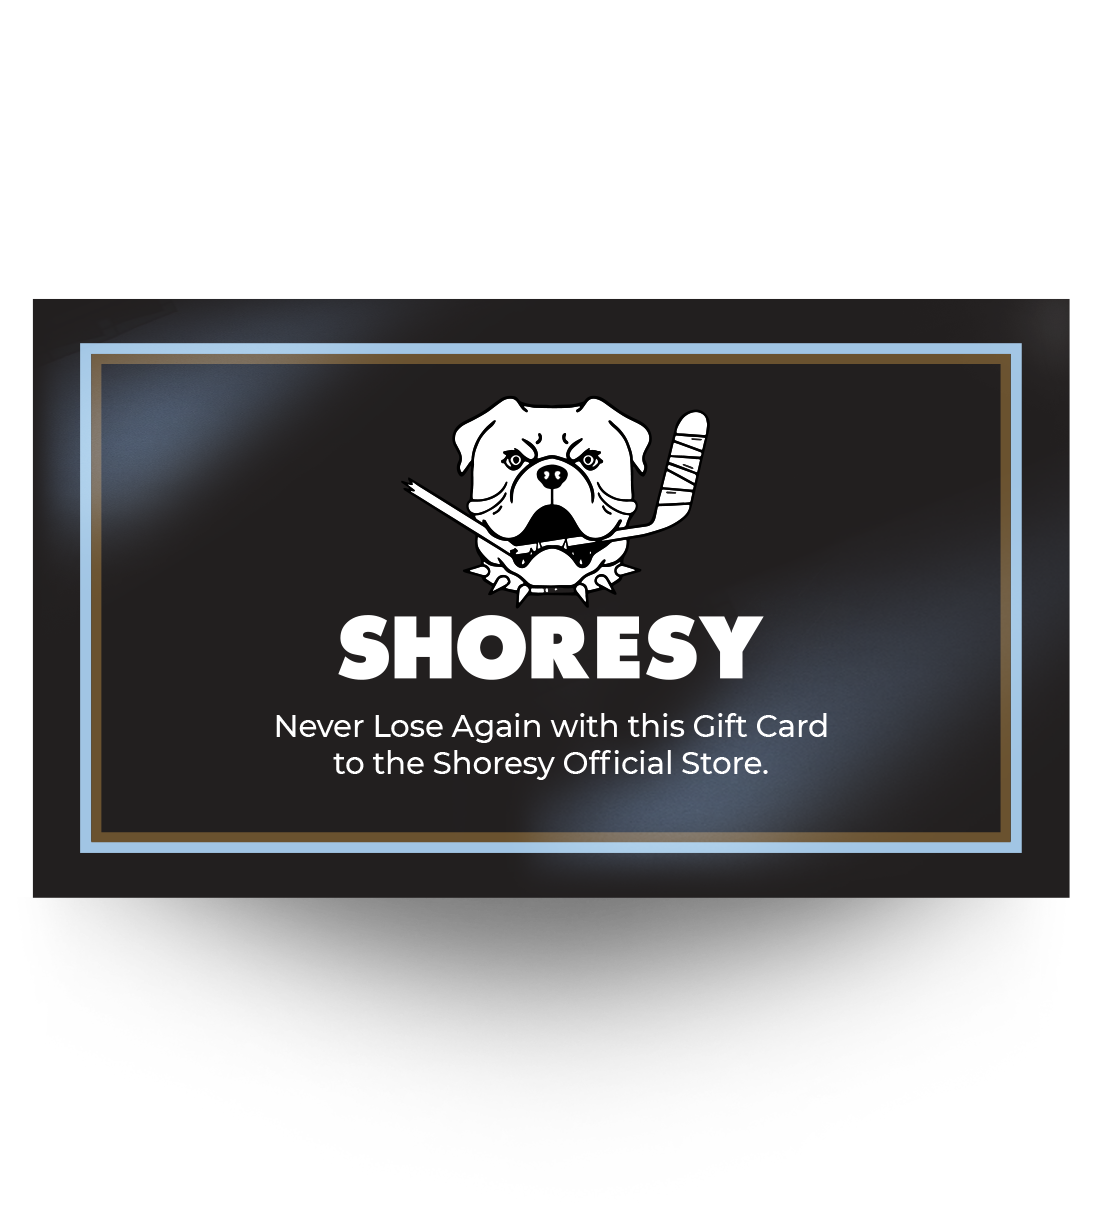 Shoresy Official Store Gift Card